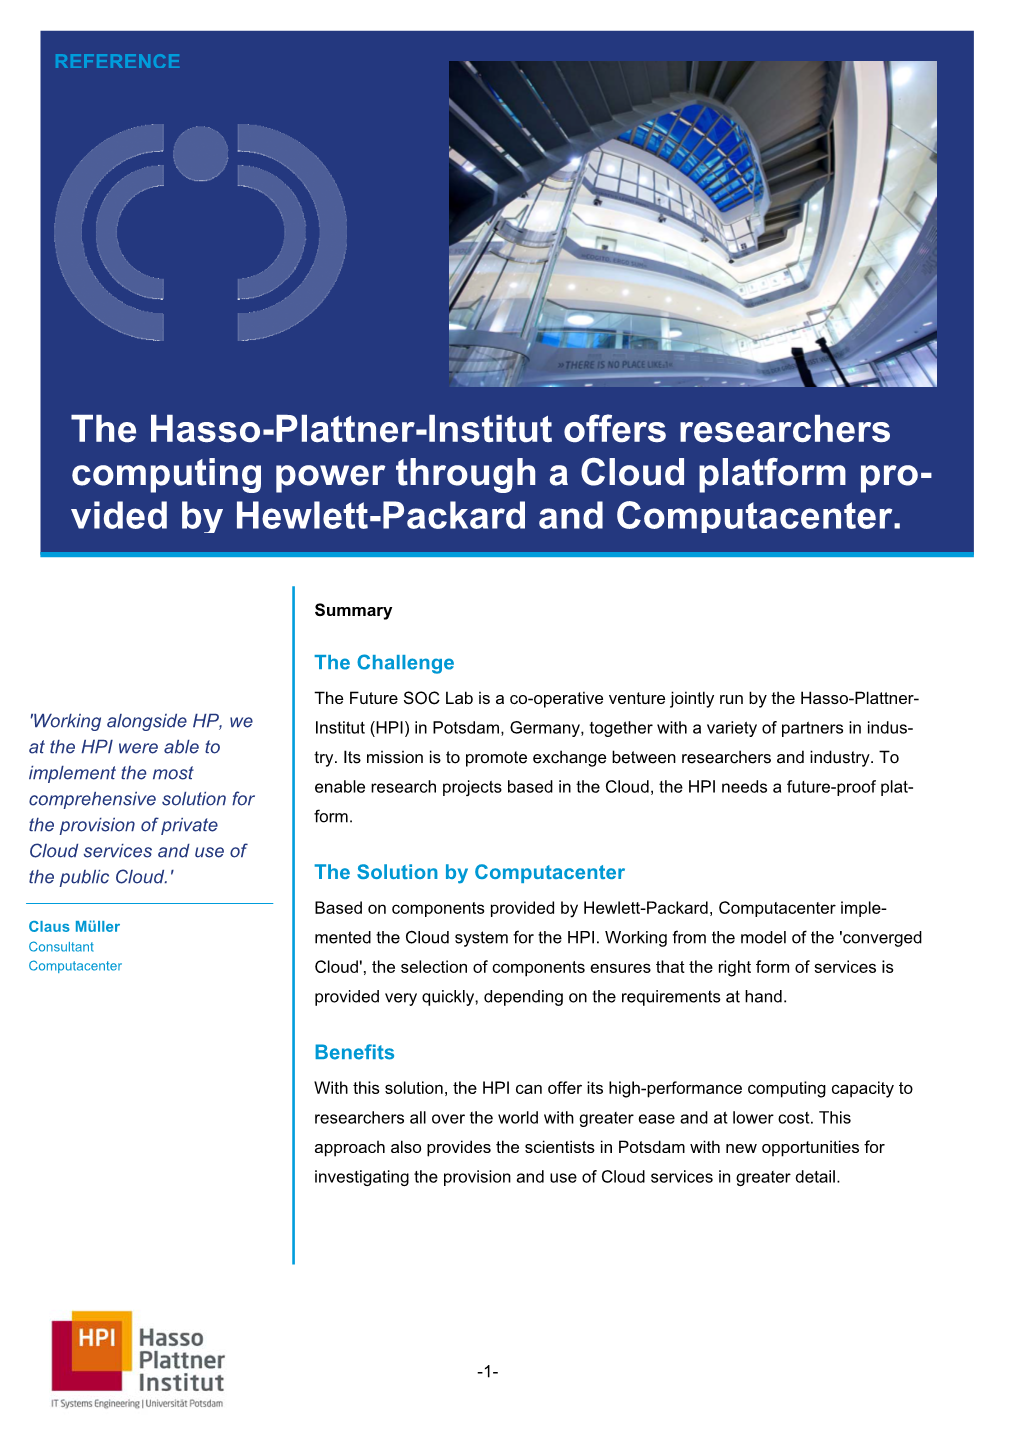 The Hasso-Plattner-Institut Offers Researchers Computing Power